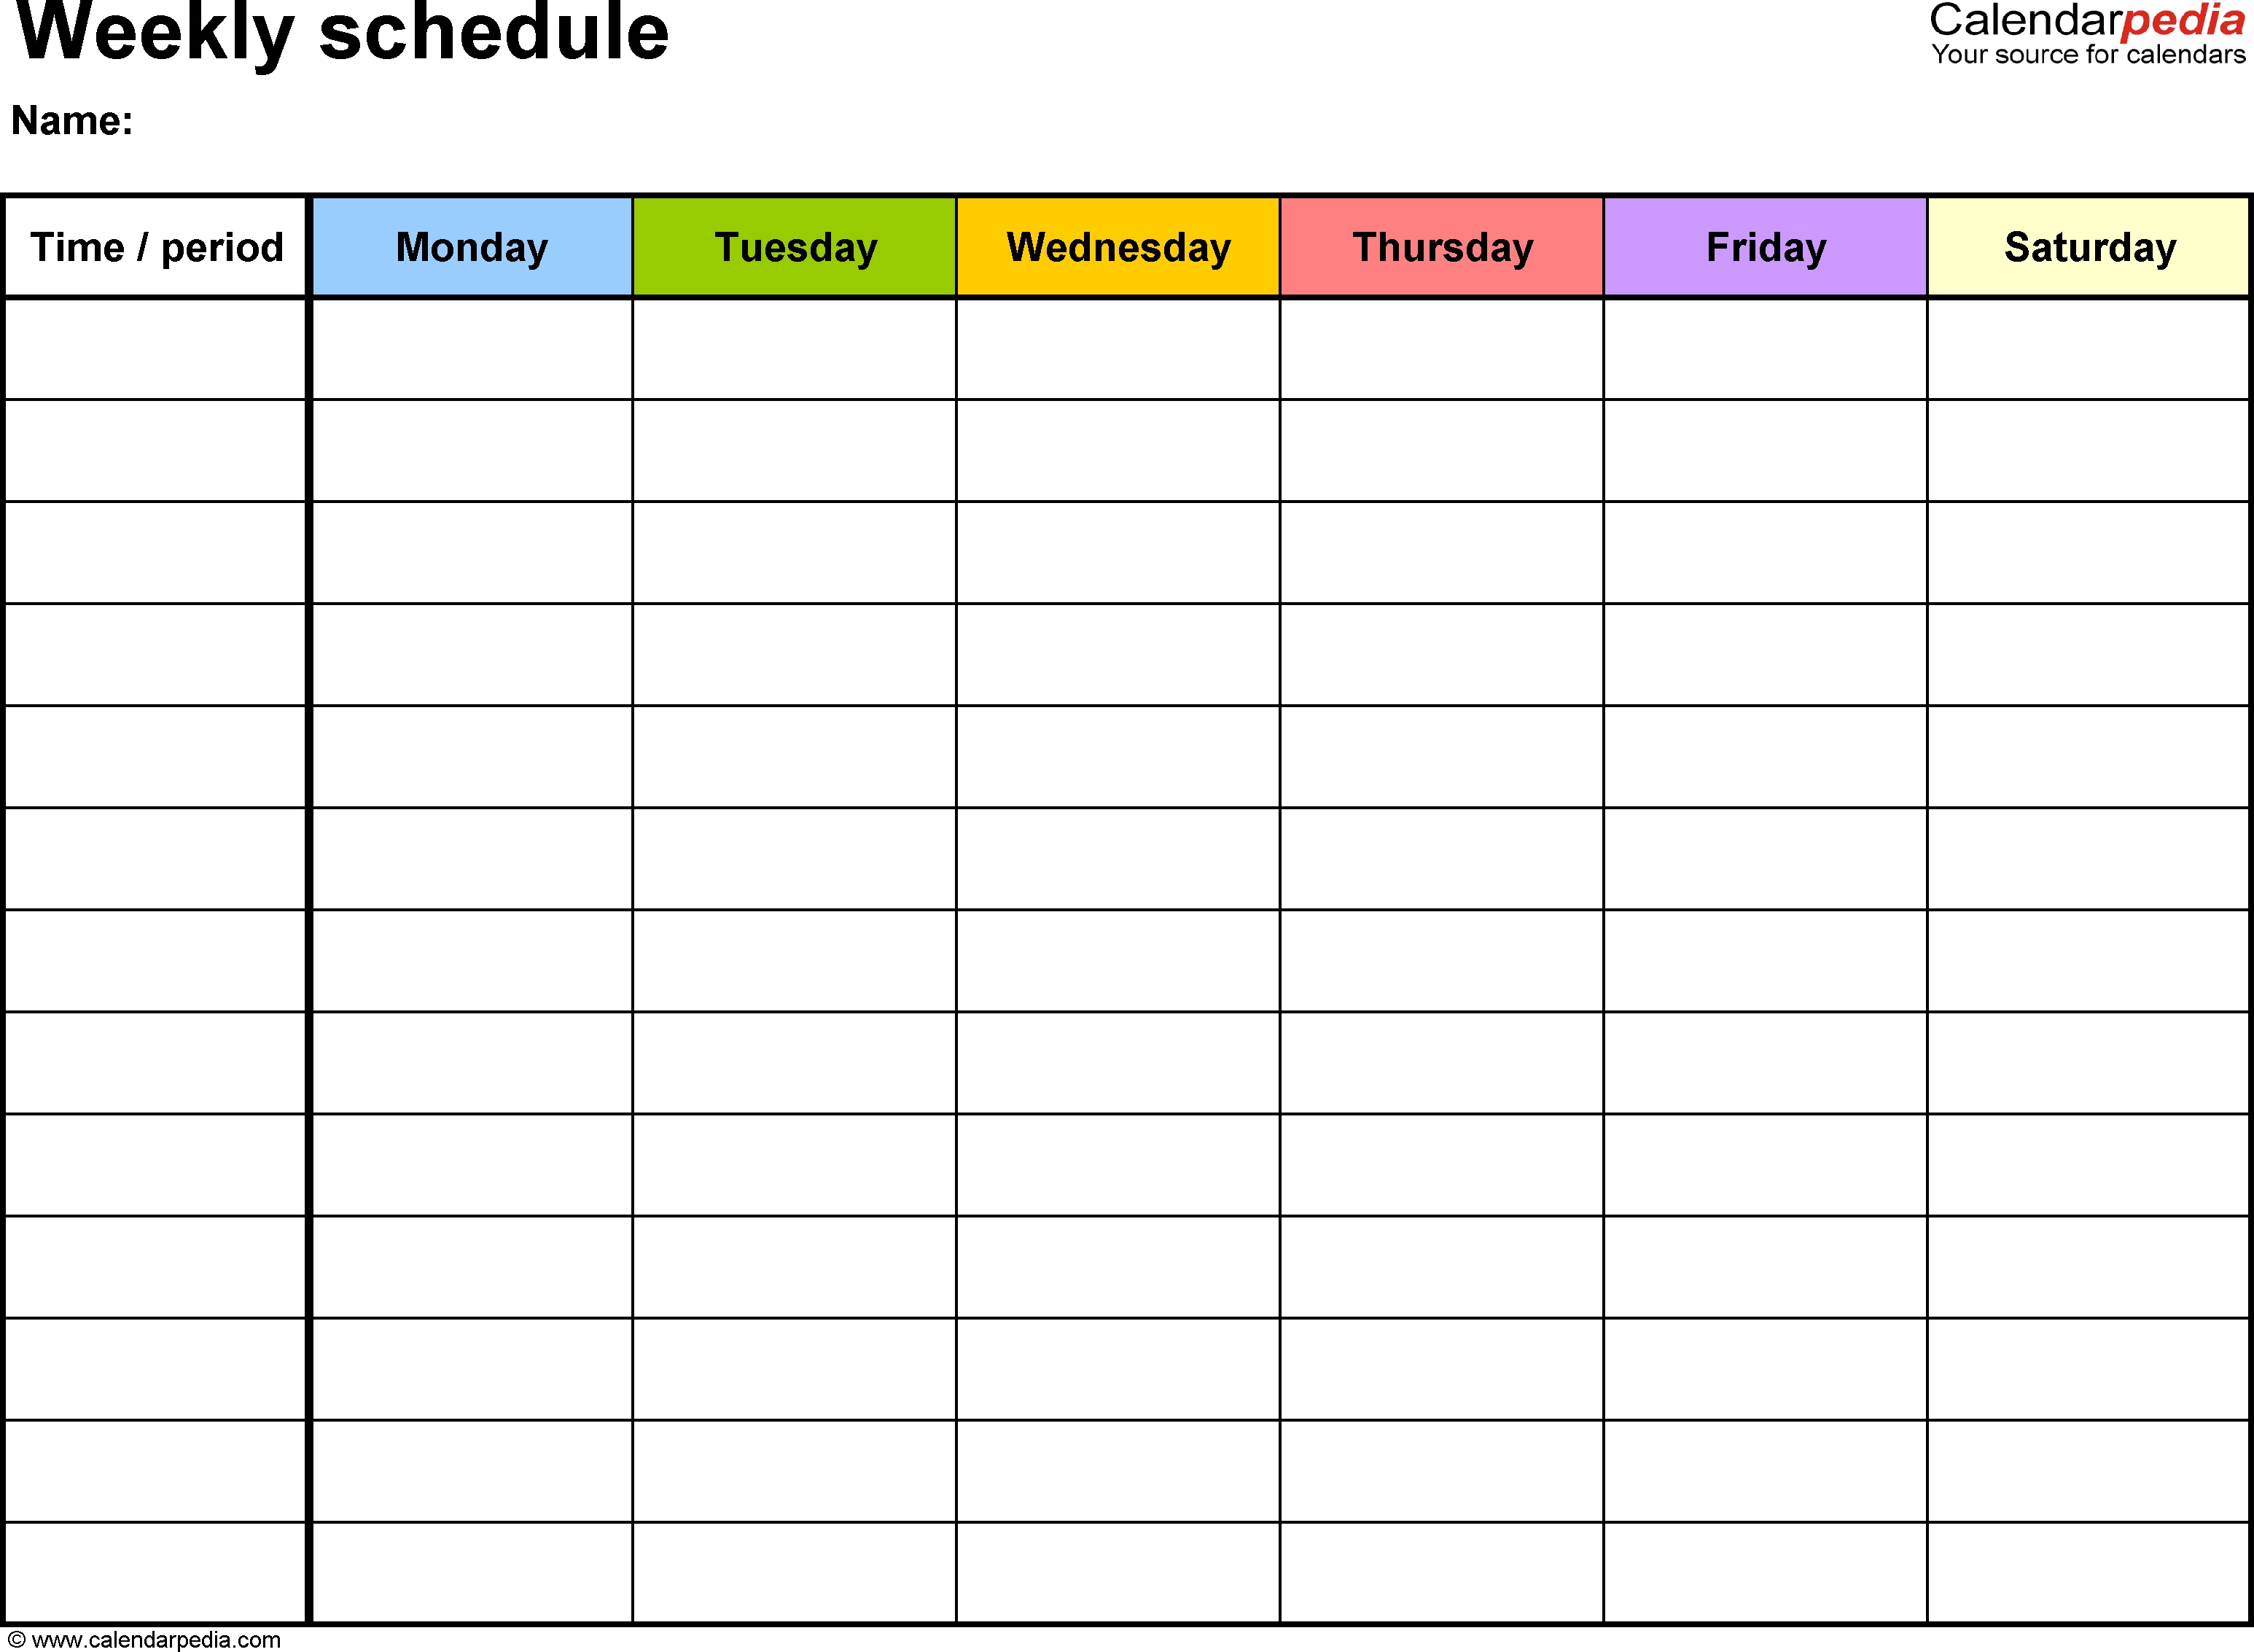 Free Weekly Schedule Templates For Word - 18 Templates-Blank Calendar Monday To Friday